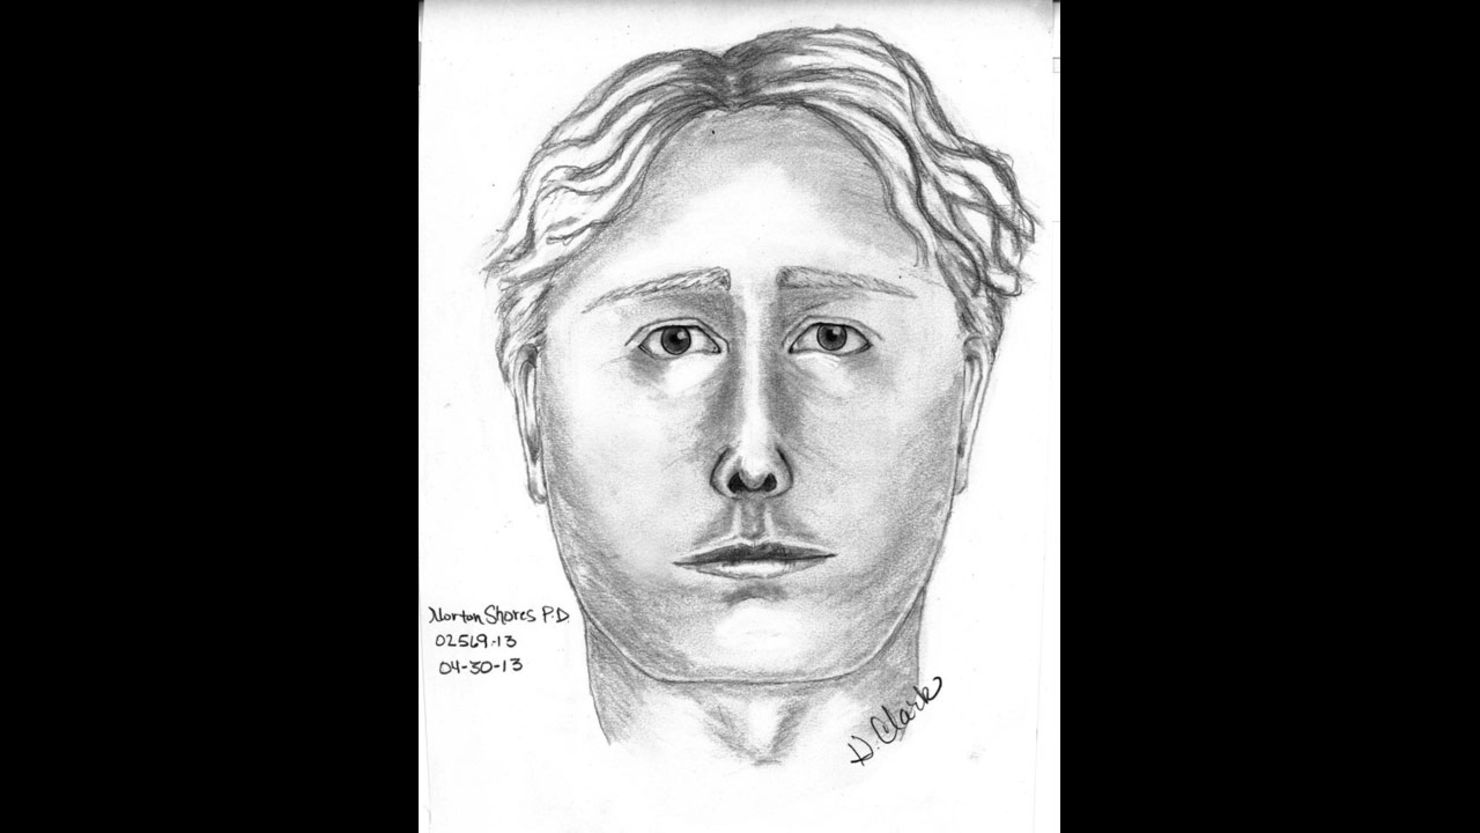 Police have released a sketch of a suspect in the abduction of Michigan gas station cashier Jessica Heeringa, 25.